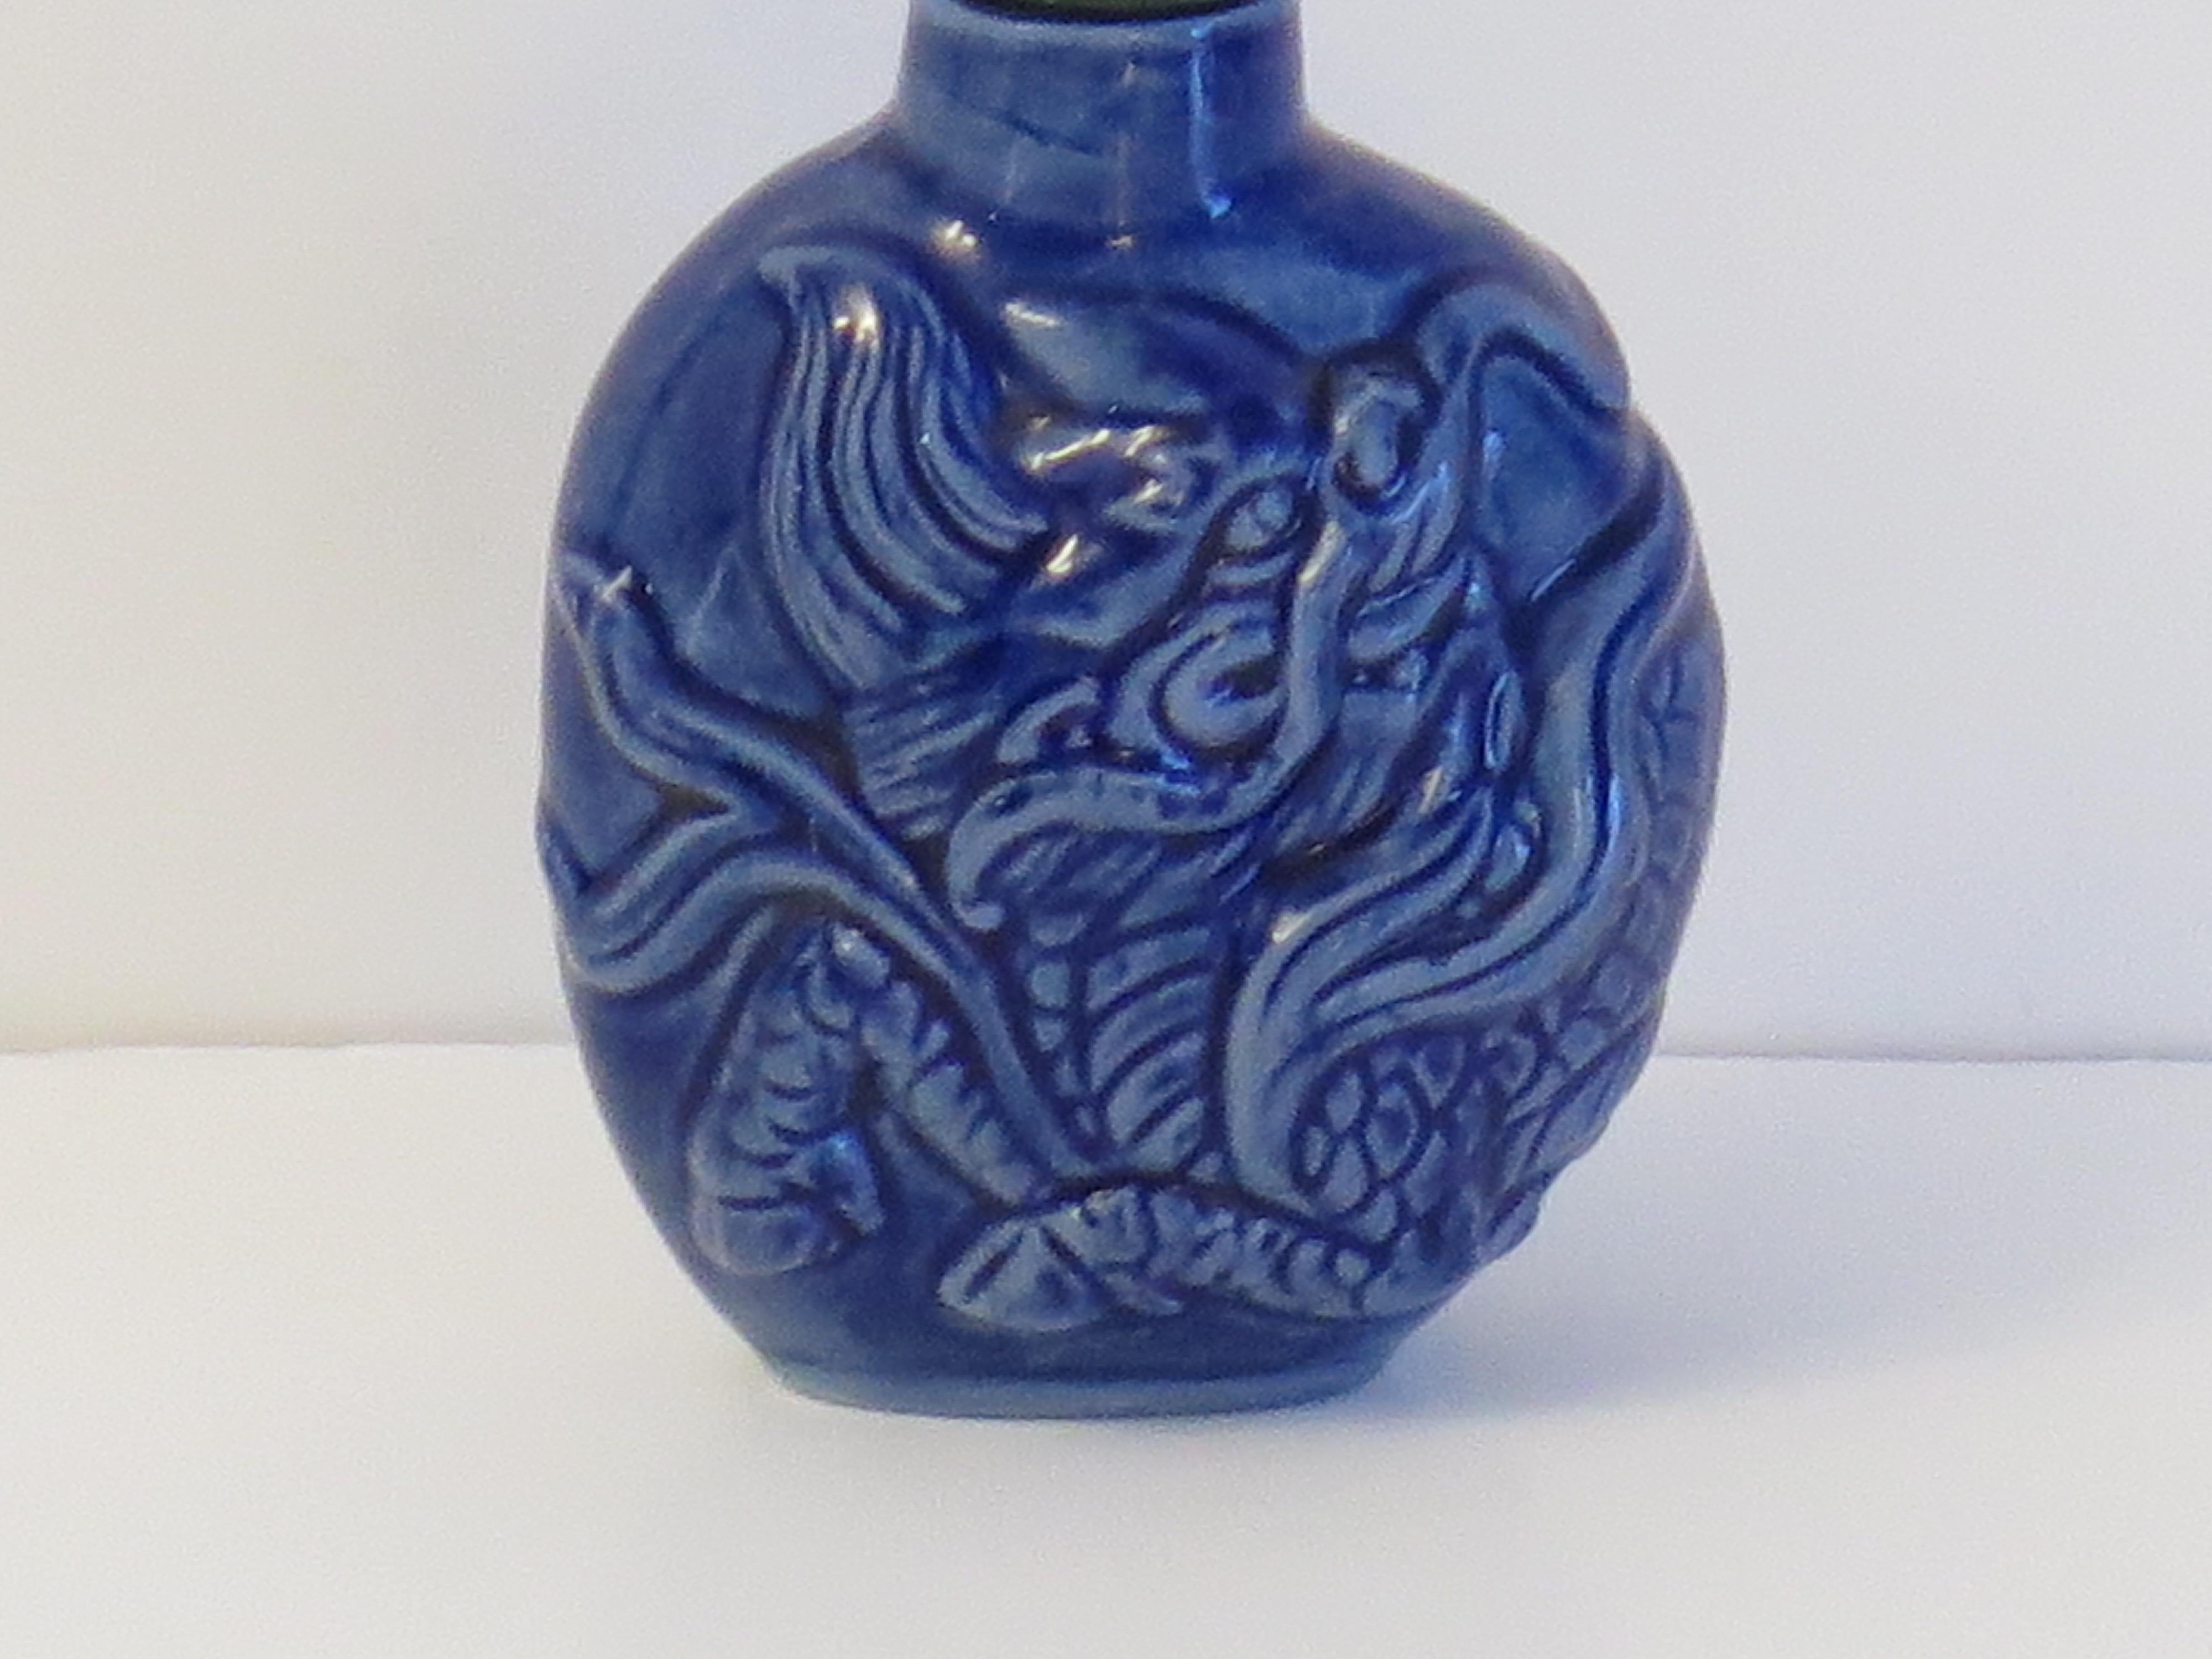 Hand-Painted Chinese Porcelain Snuff Bottle moulded dragon stone top with spoon, Circa 1930s